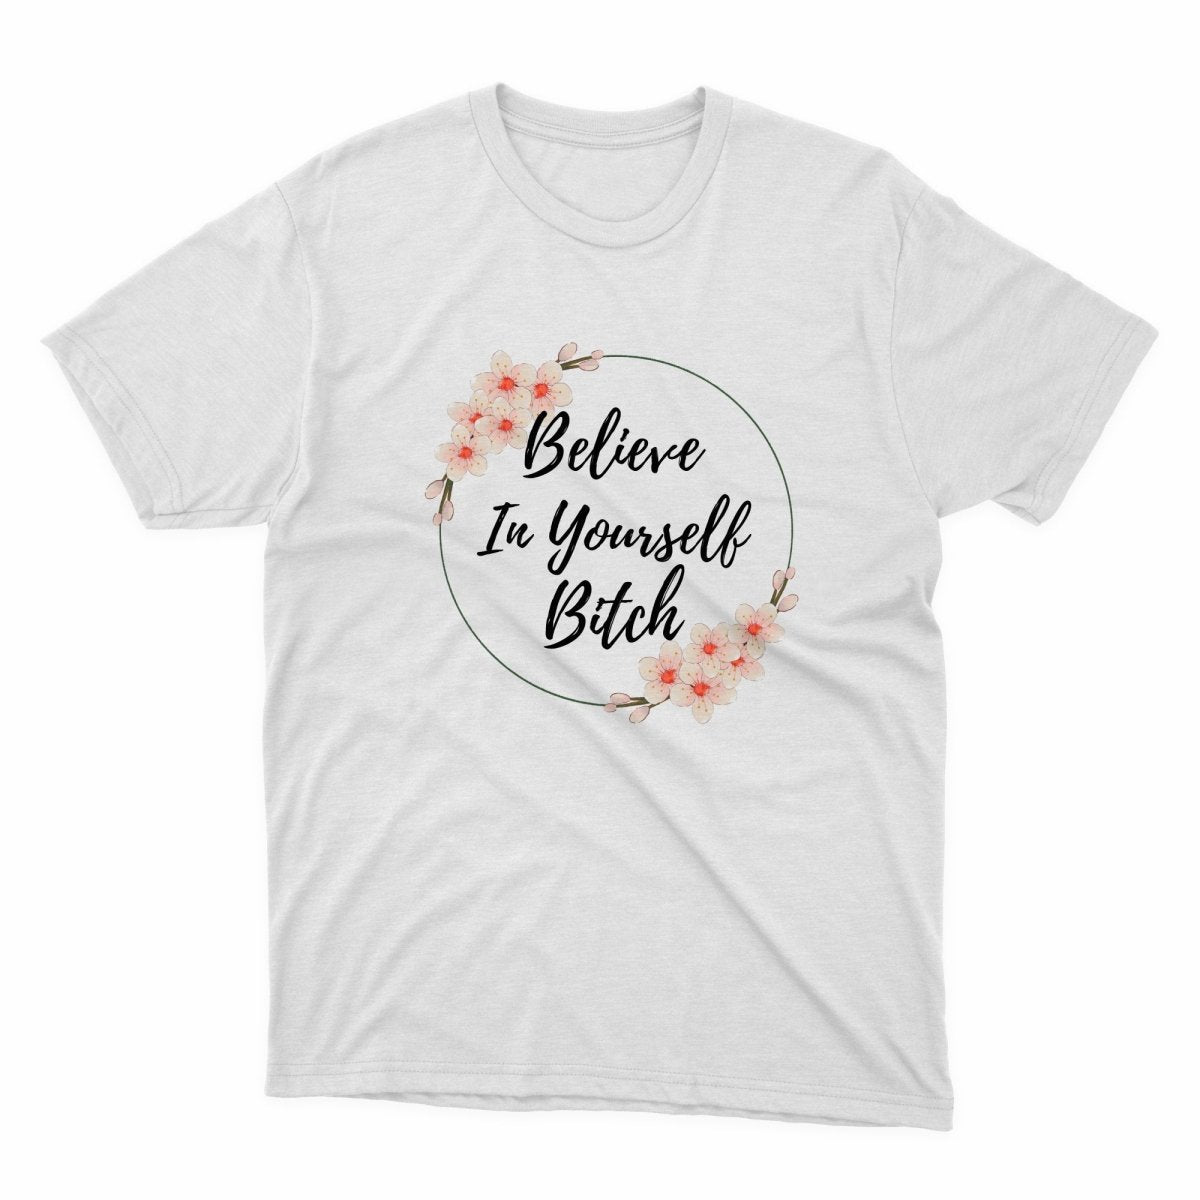 Believe In Yourself Bitch Shirt - stickerbullBelieve In Yourself Bitch ShirtShirtsPrintifystickerbull11854541831013365017WhiteSa white t - shirt with the words believe in yourself bitch on it